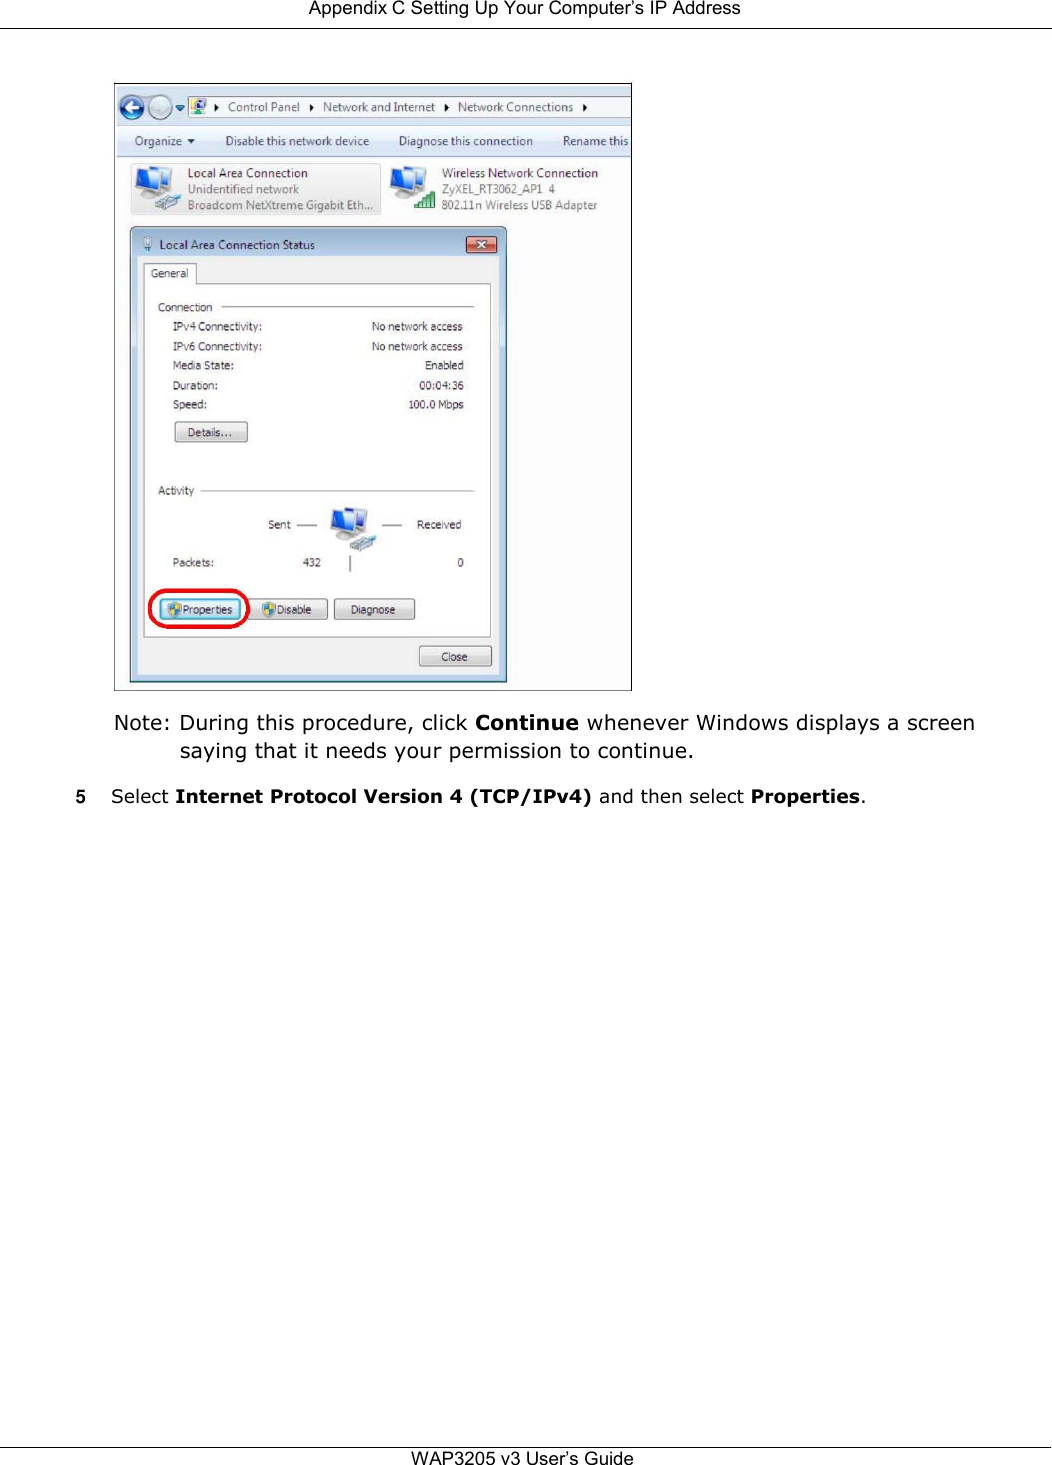  Appendix C Setting Up Your Computer’s IP Address                                  Note: During this procedure, click Continue whenever Windows displays a screen saying that it needs your permission to continue.  5 Select Internet Protocol Version 4 (TCP/IPv4) and then select Properties.                               WAP3205 v3 User’s Guide 